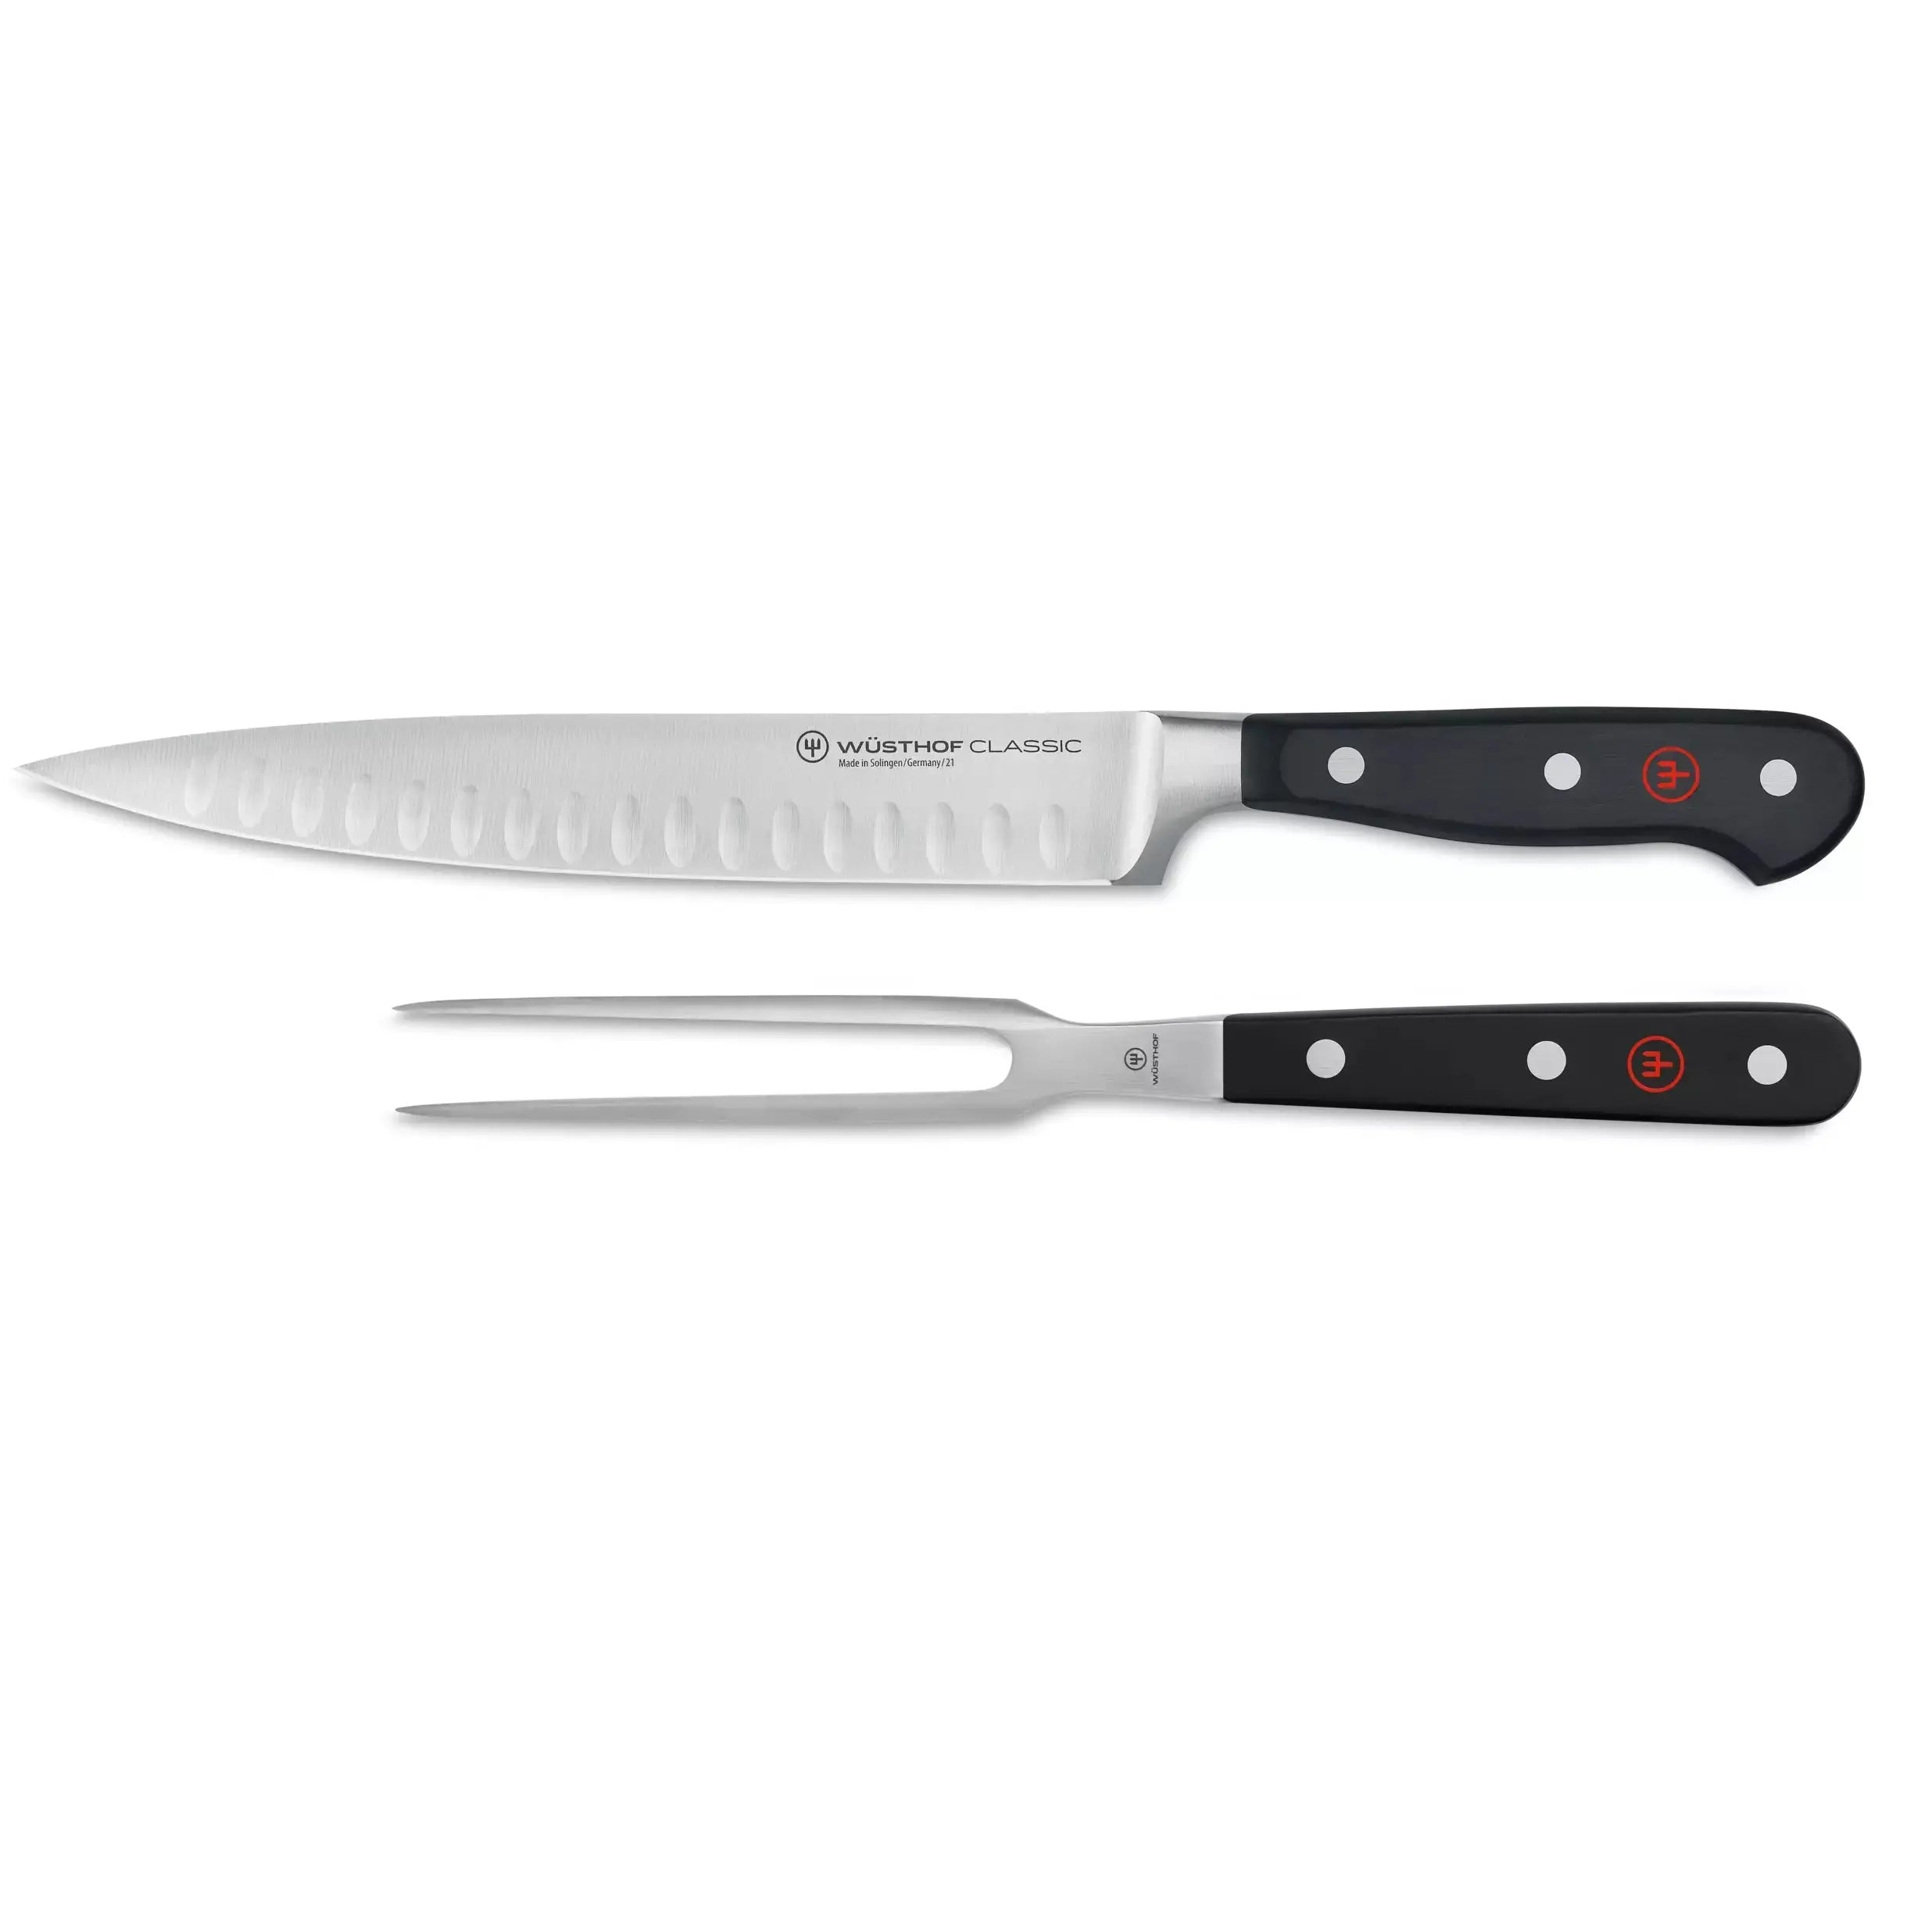 Wusthof Classic 2 Piece Carving Set - Browns Kitchen